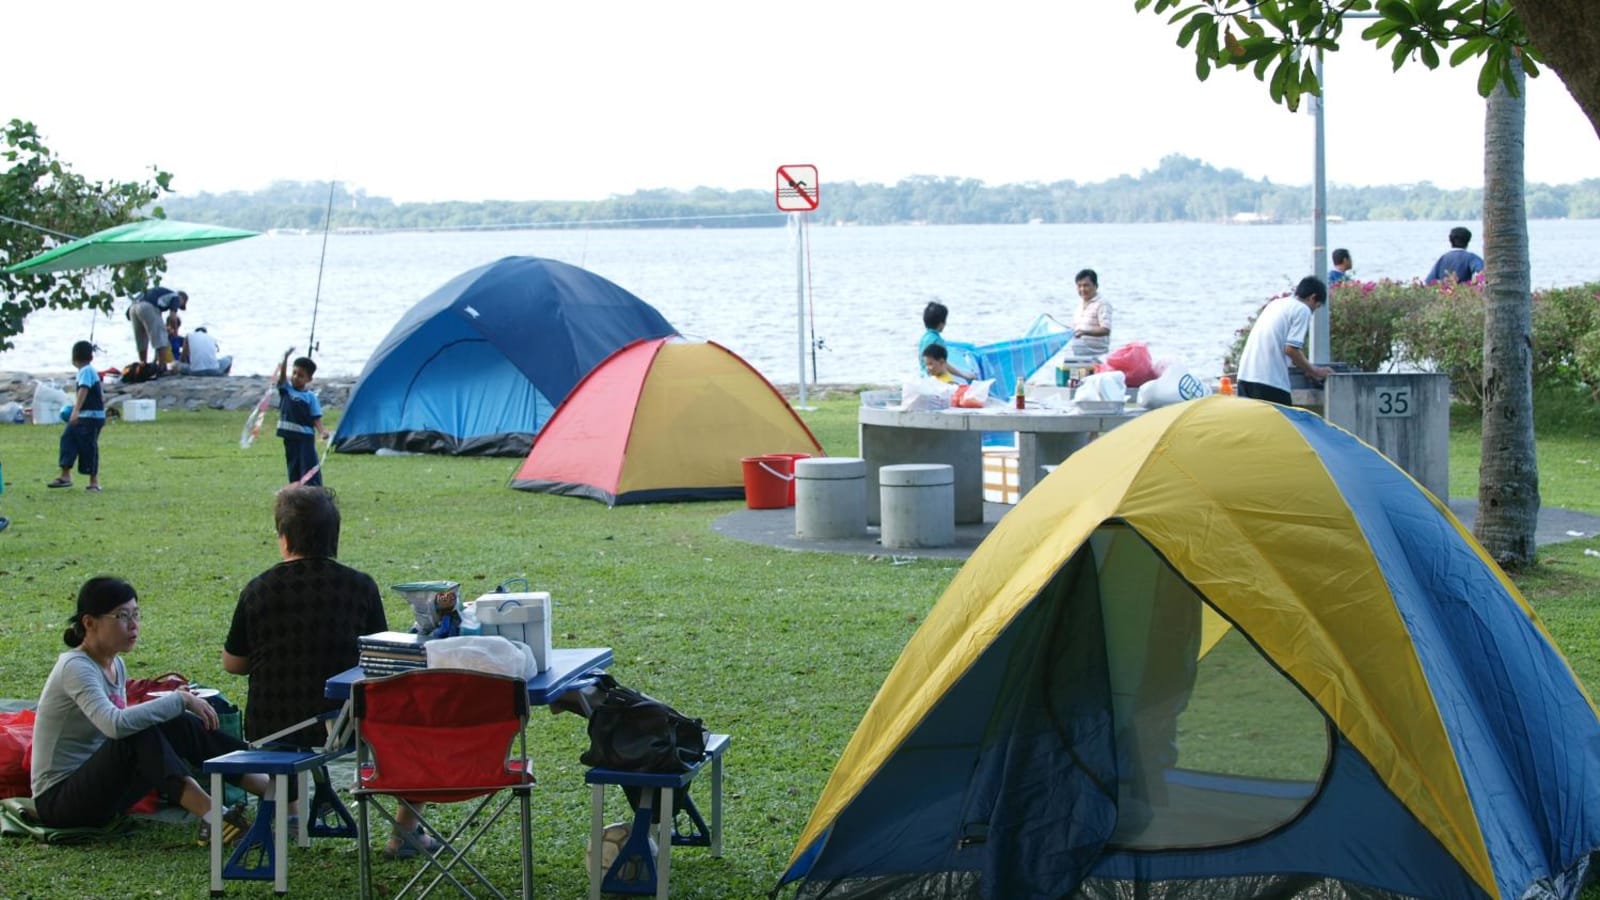 Camping sites, barbecue pits to reopen as part of streamlined COVID-19 measures